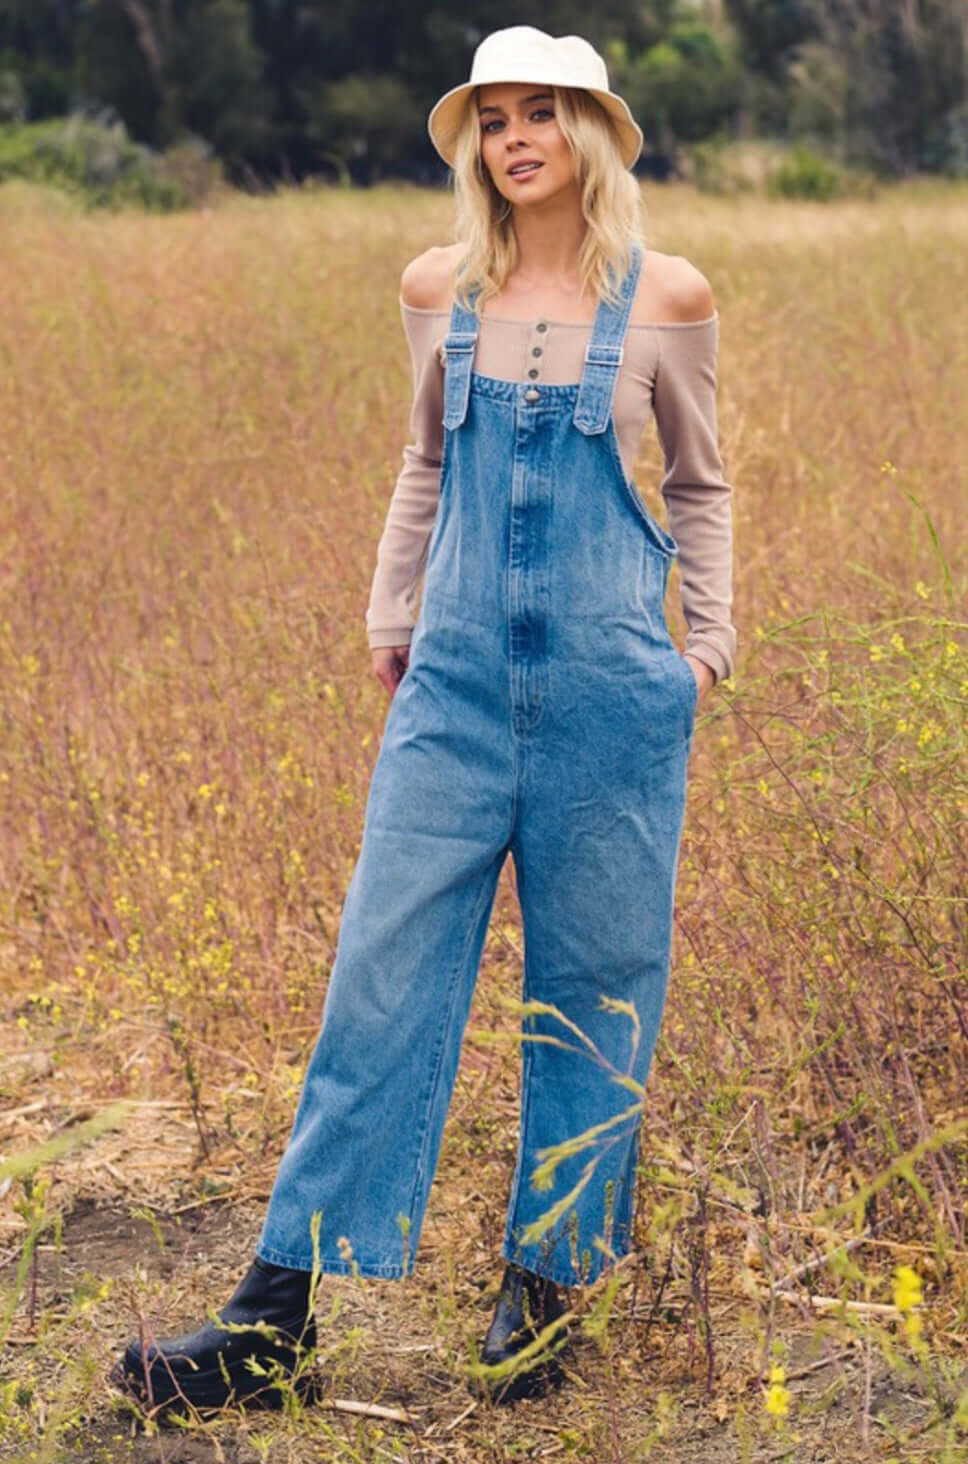 The Dungaree Dress for Girls: Effortless Style and Comfort